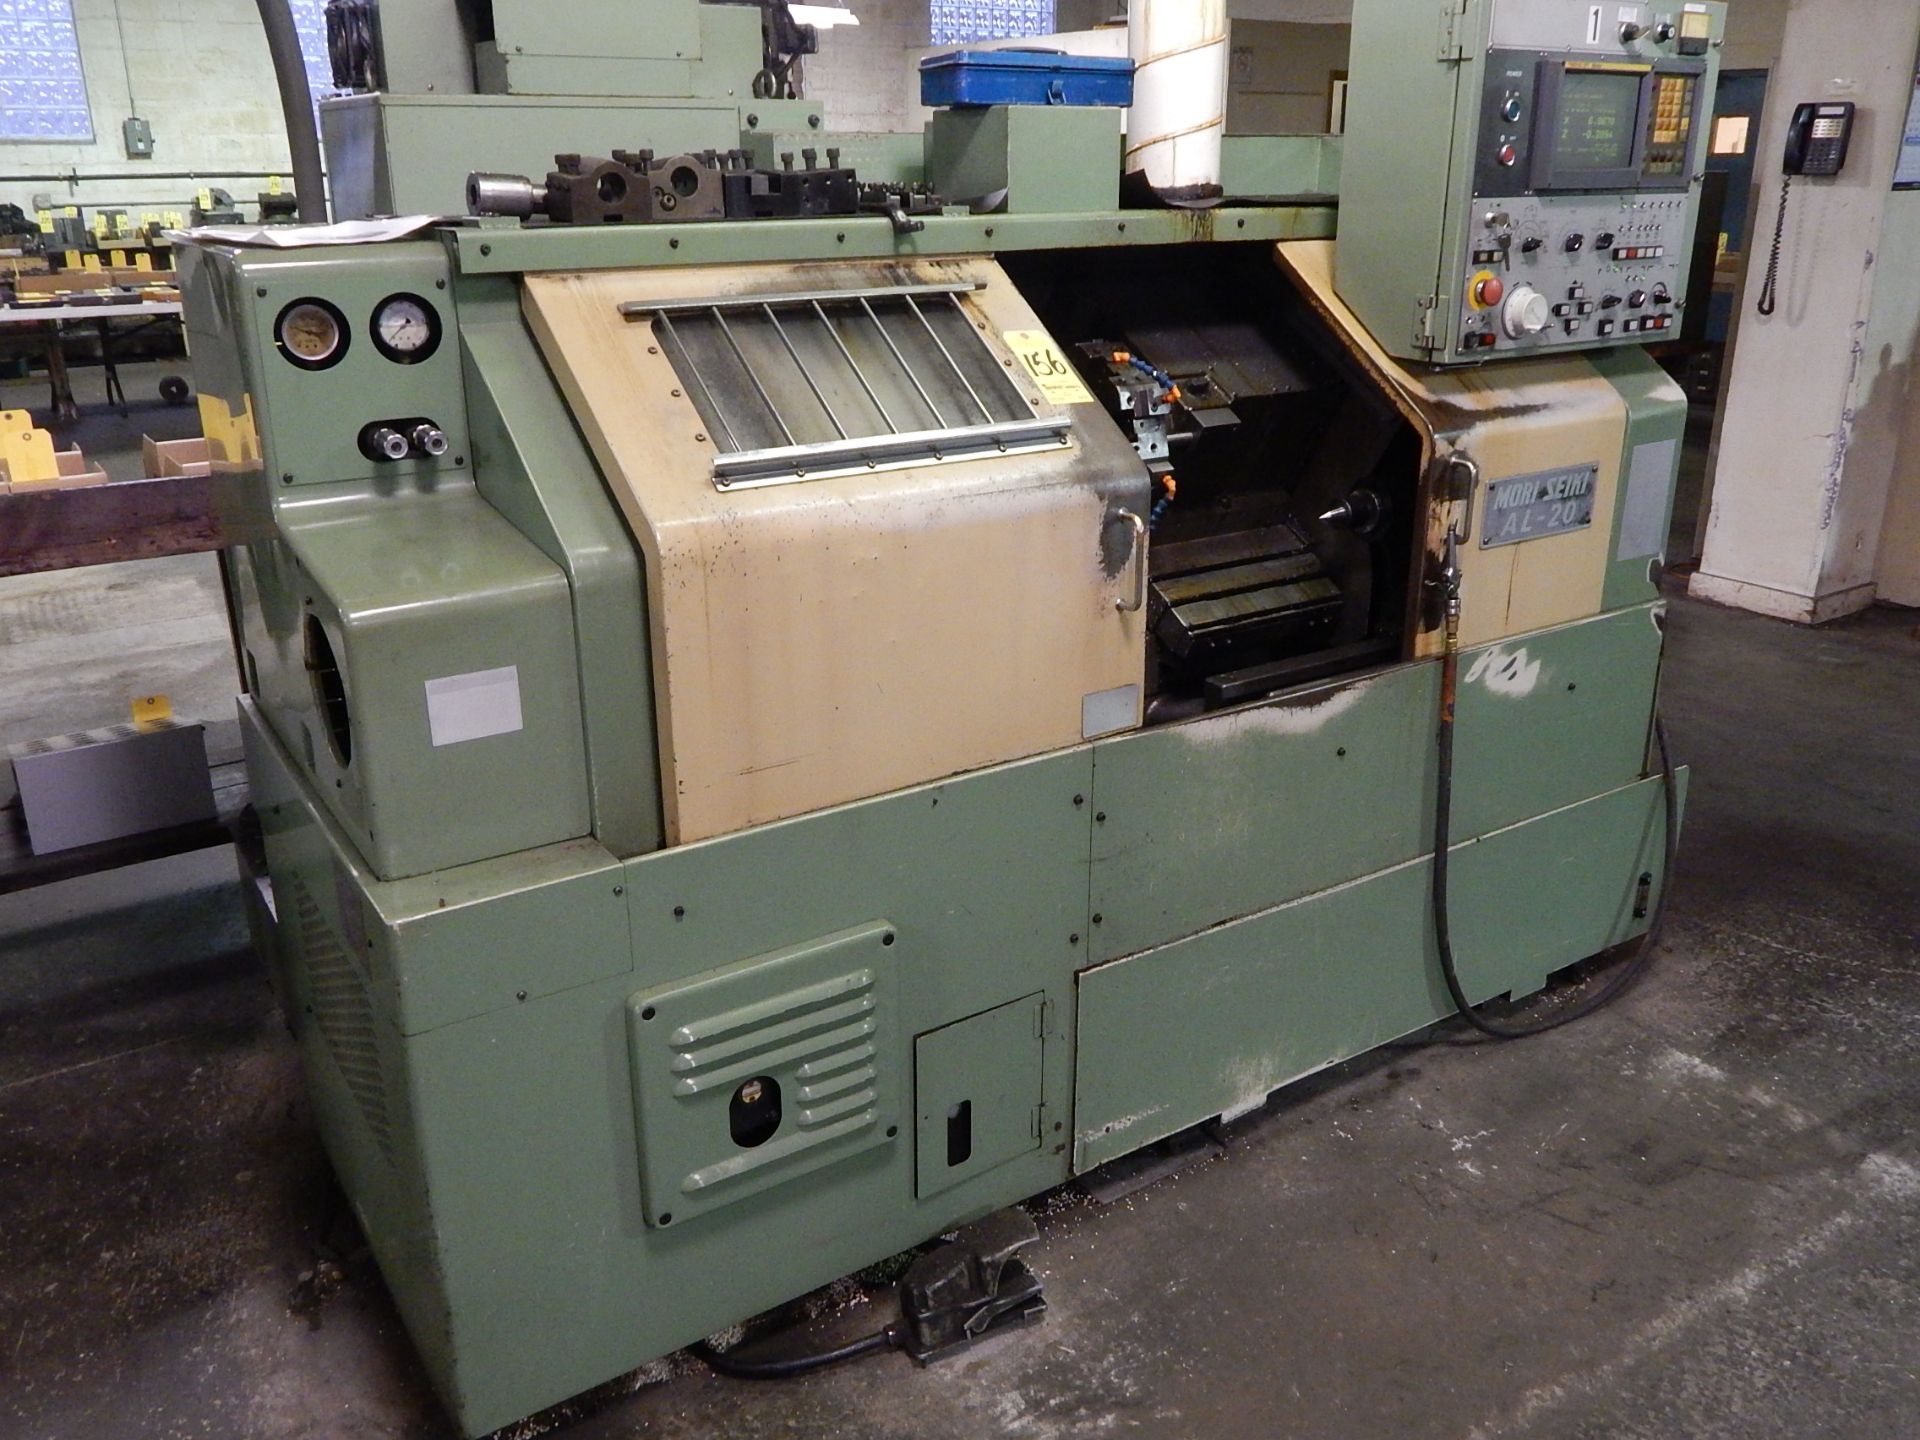 Mori-Seiki AL-20, CNC Turning Center, s/n 2796, 8 In. 3-Jaw Chuck, 8 Station Turret, Tailstock, - Image 4 of 12